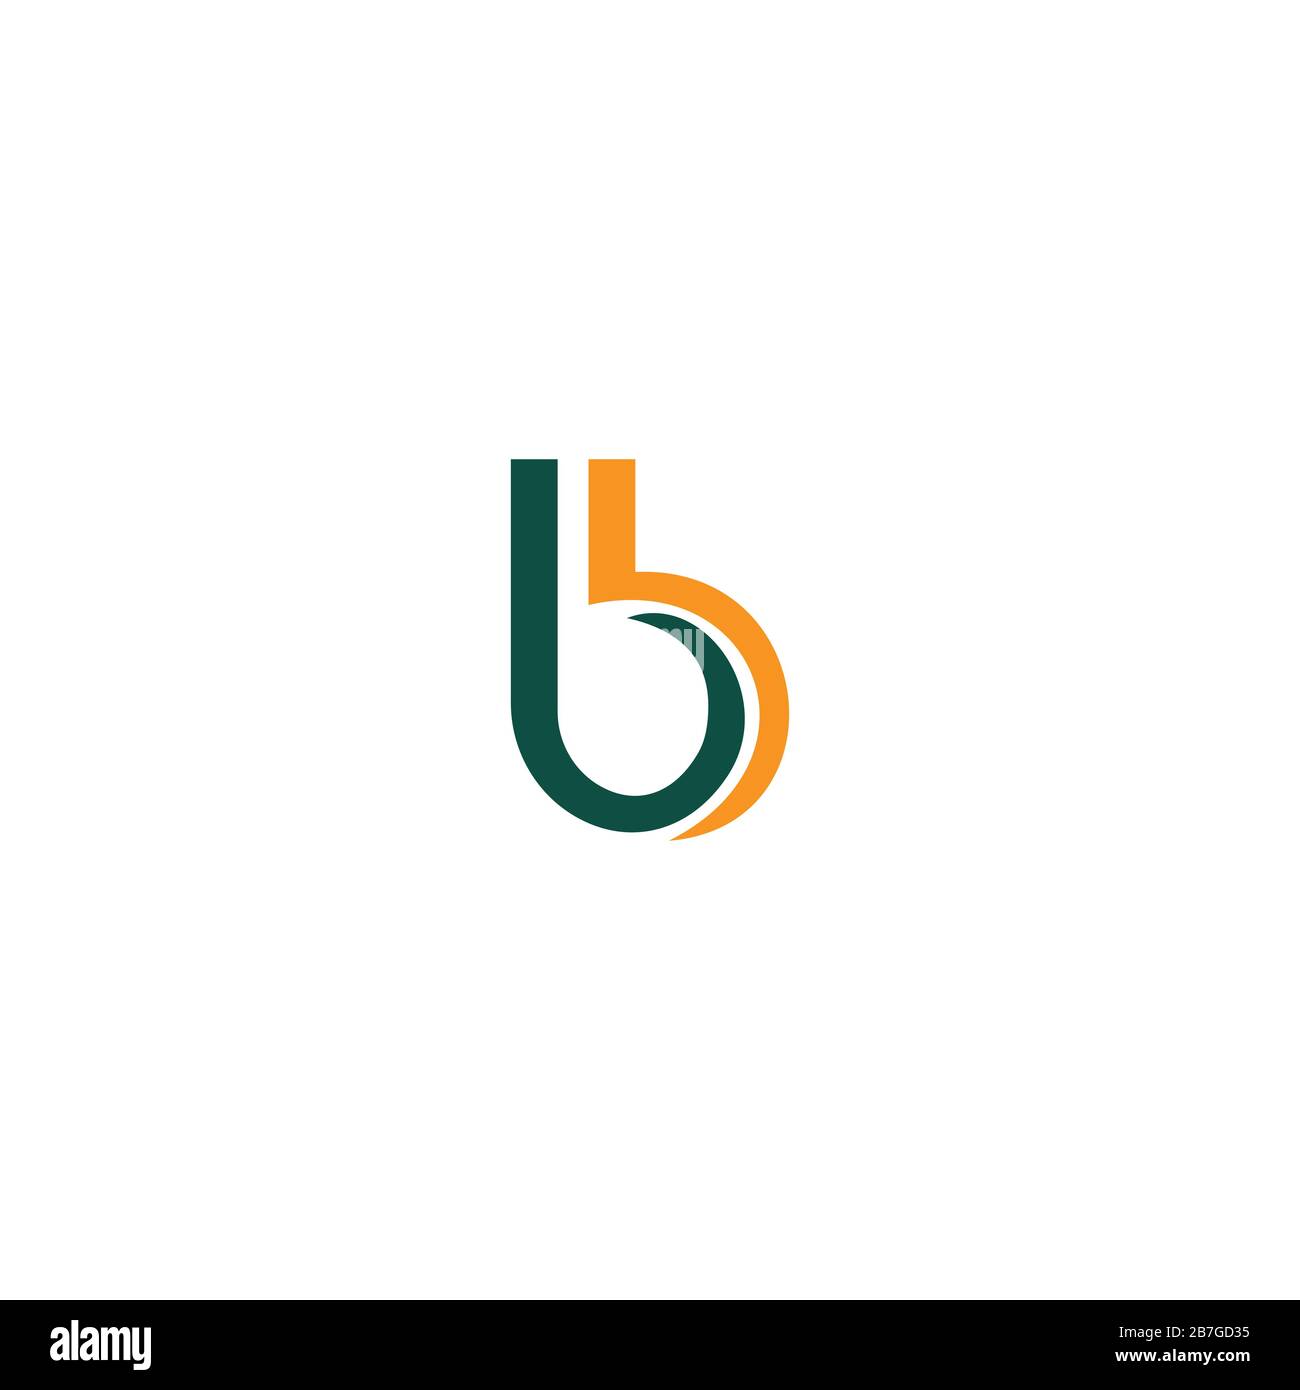 Bh Logo High Resolution Stock Photography and Images - Alamy